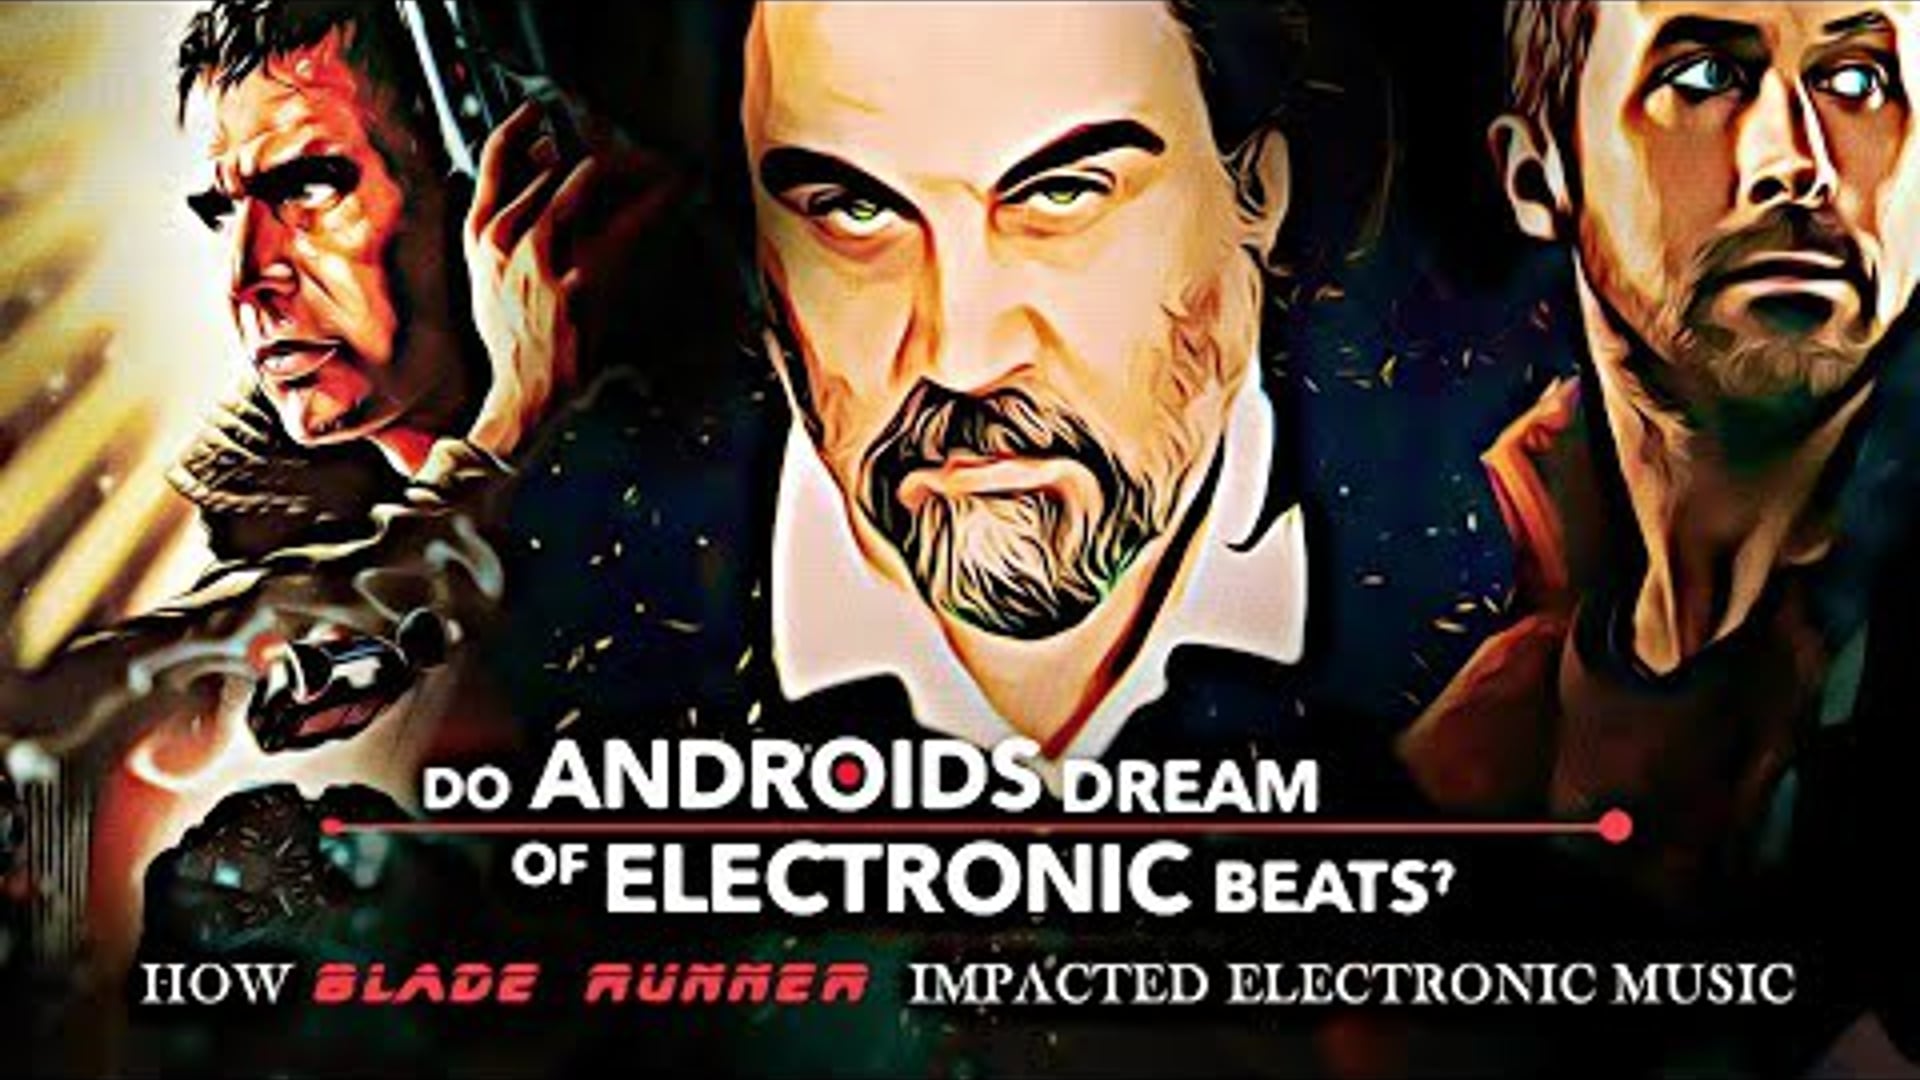 BLADE RUNNER DO ANDROIDS DREAM OF ELECTRONIC BEATS